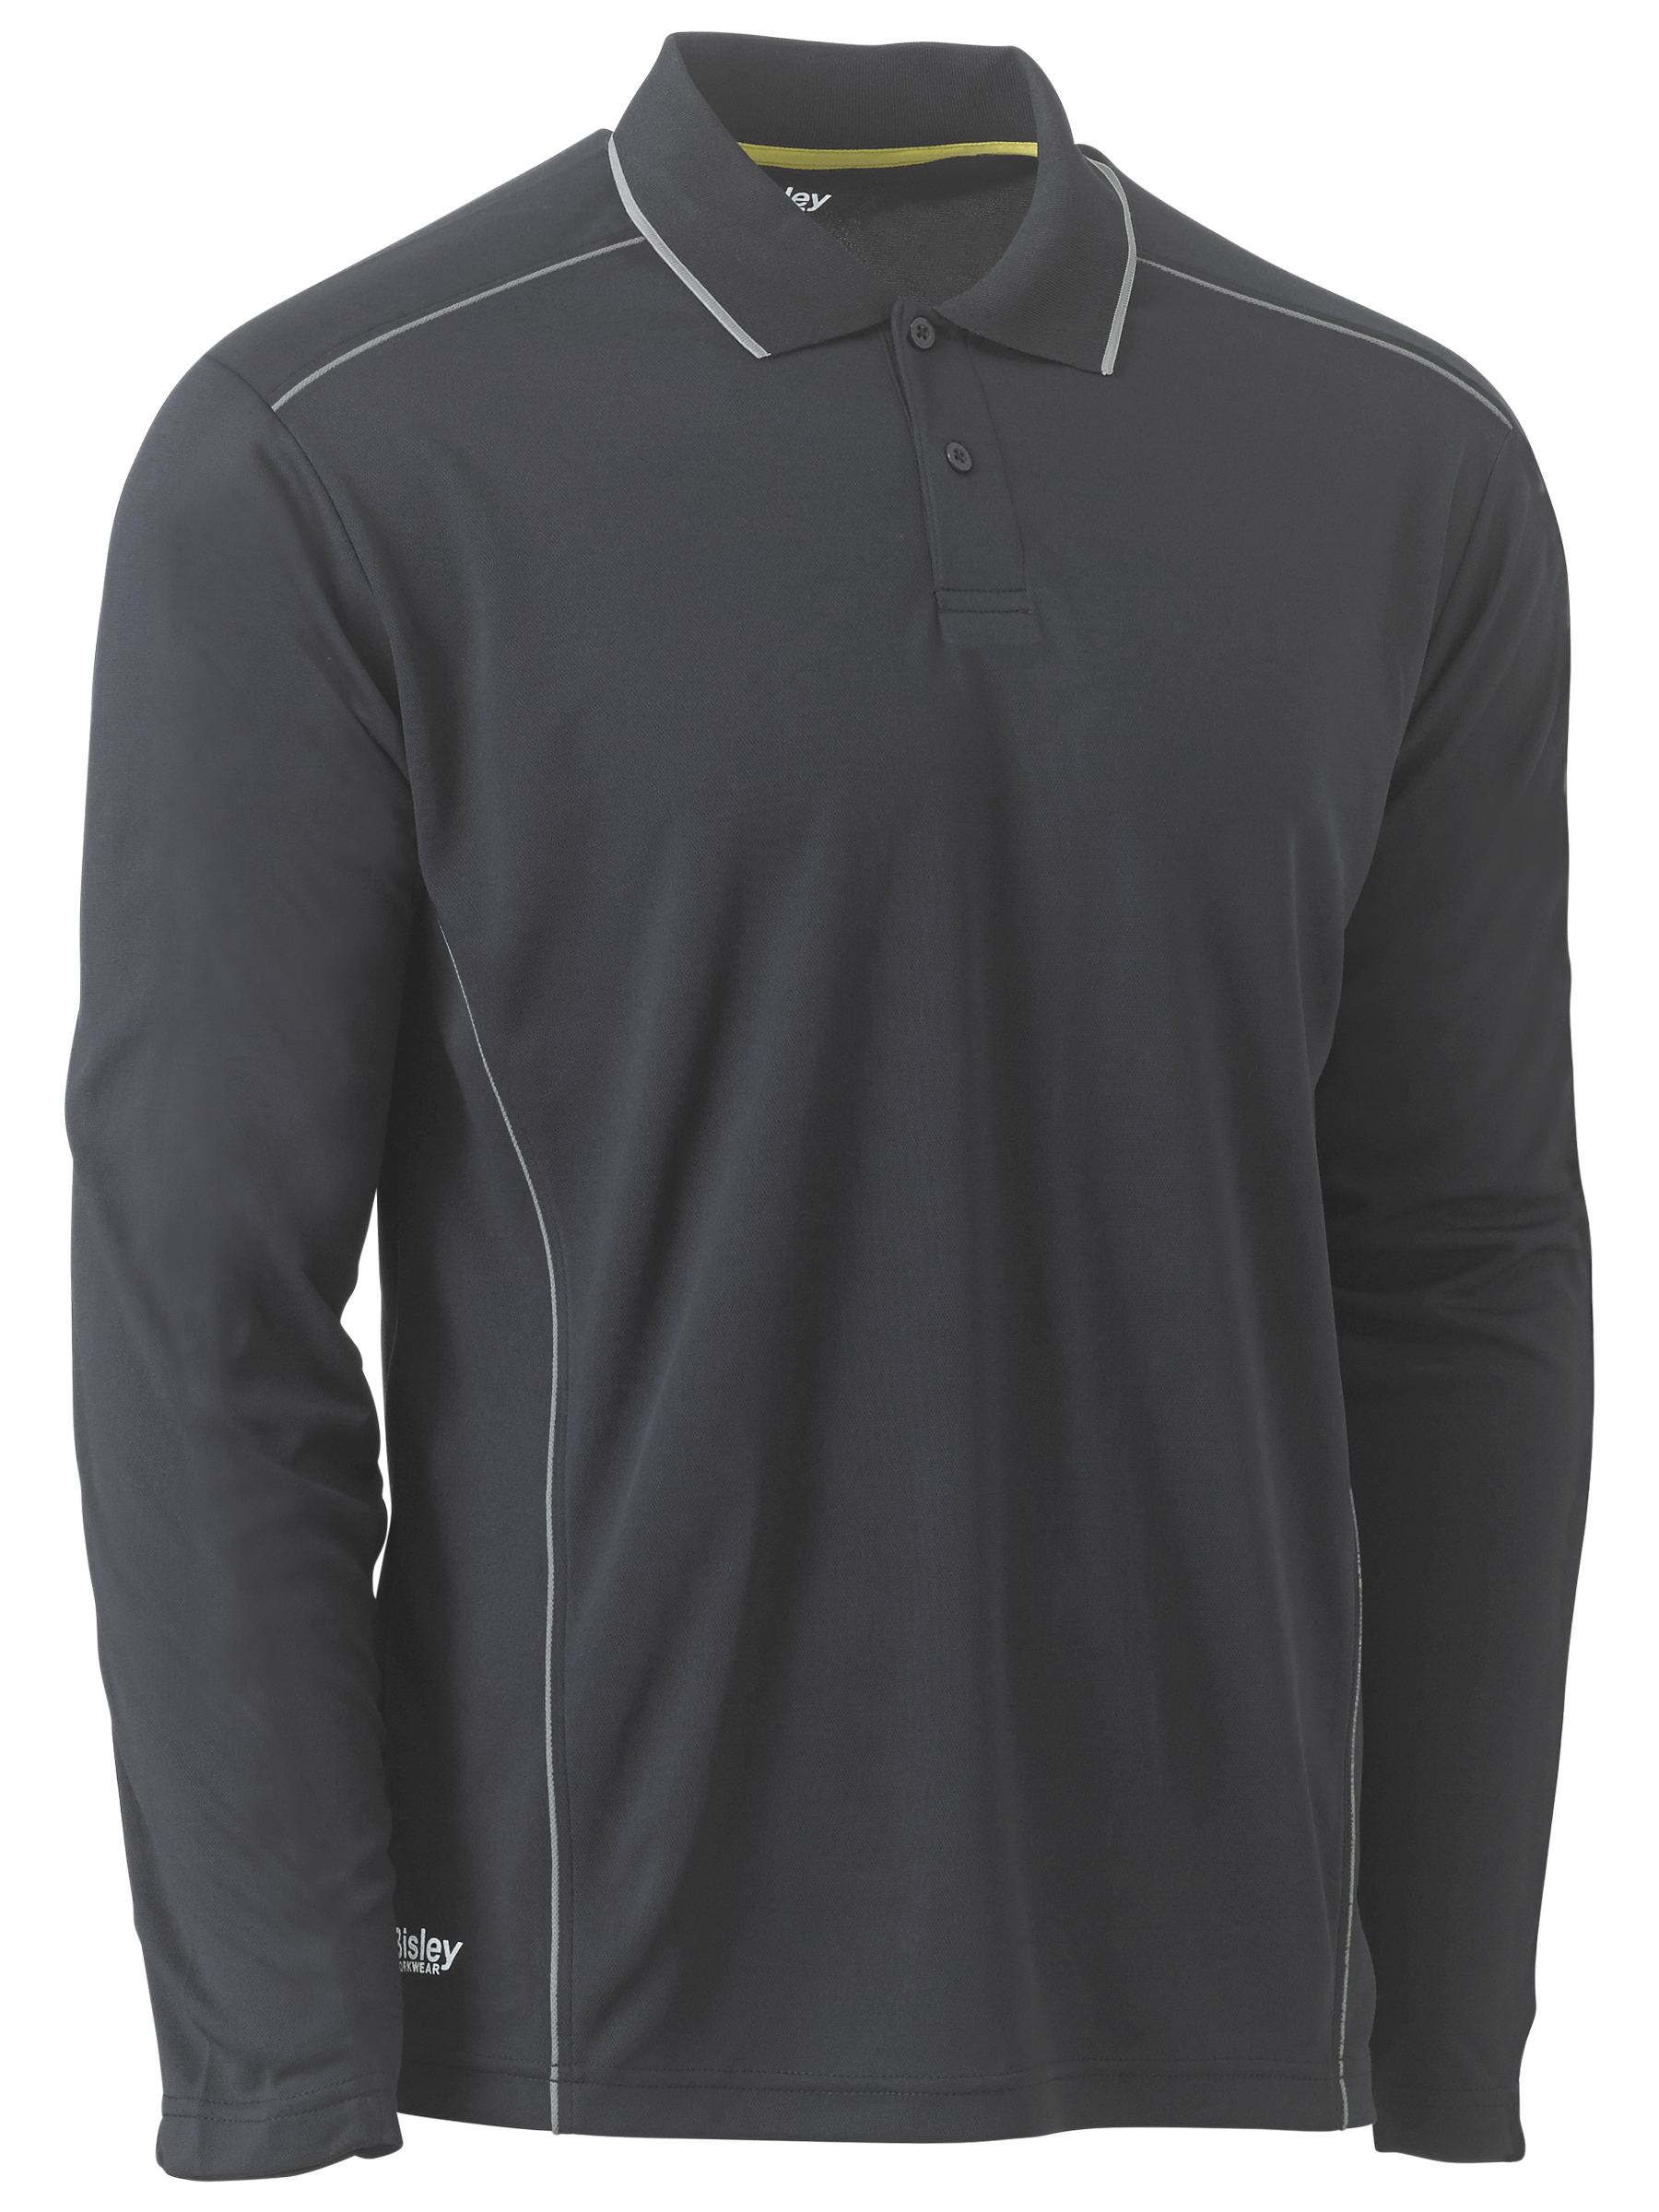 Cool mesh long sleeve polo shirt with reflective piping - BK6425 ...